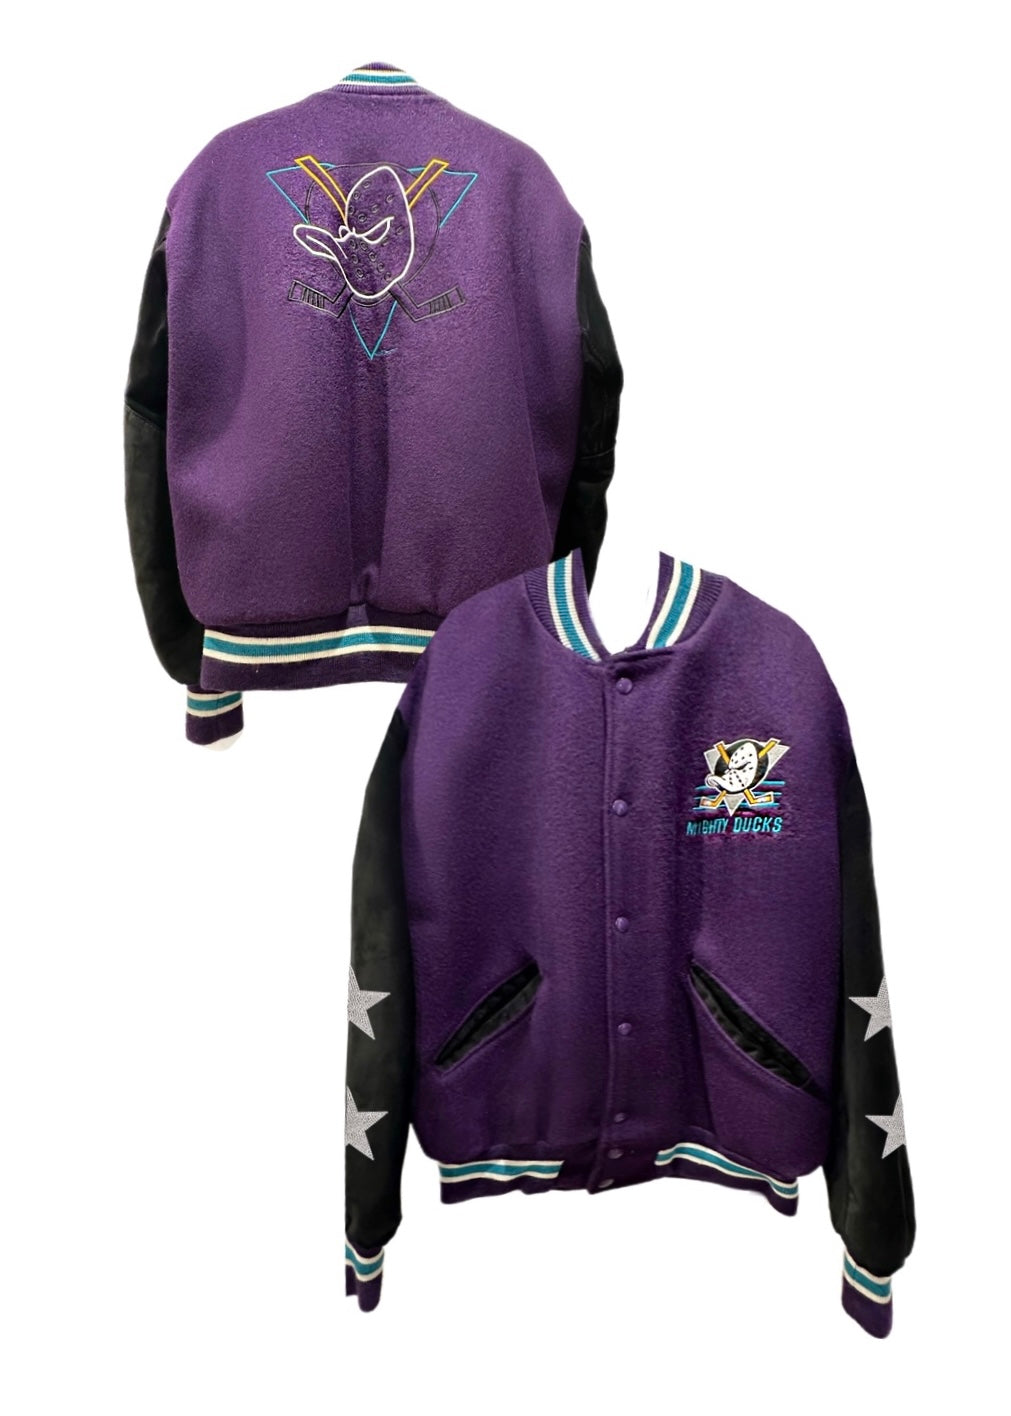 Anaheim Ducks, Hockey One of a Kind Vintage “Mighty Duck” Rare Find Bomber Jacket, Suede Sleeves with Crystal Star Design